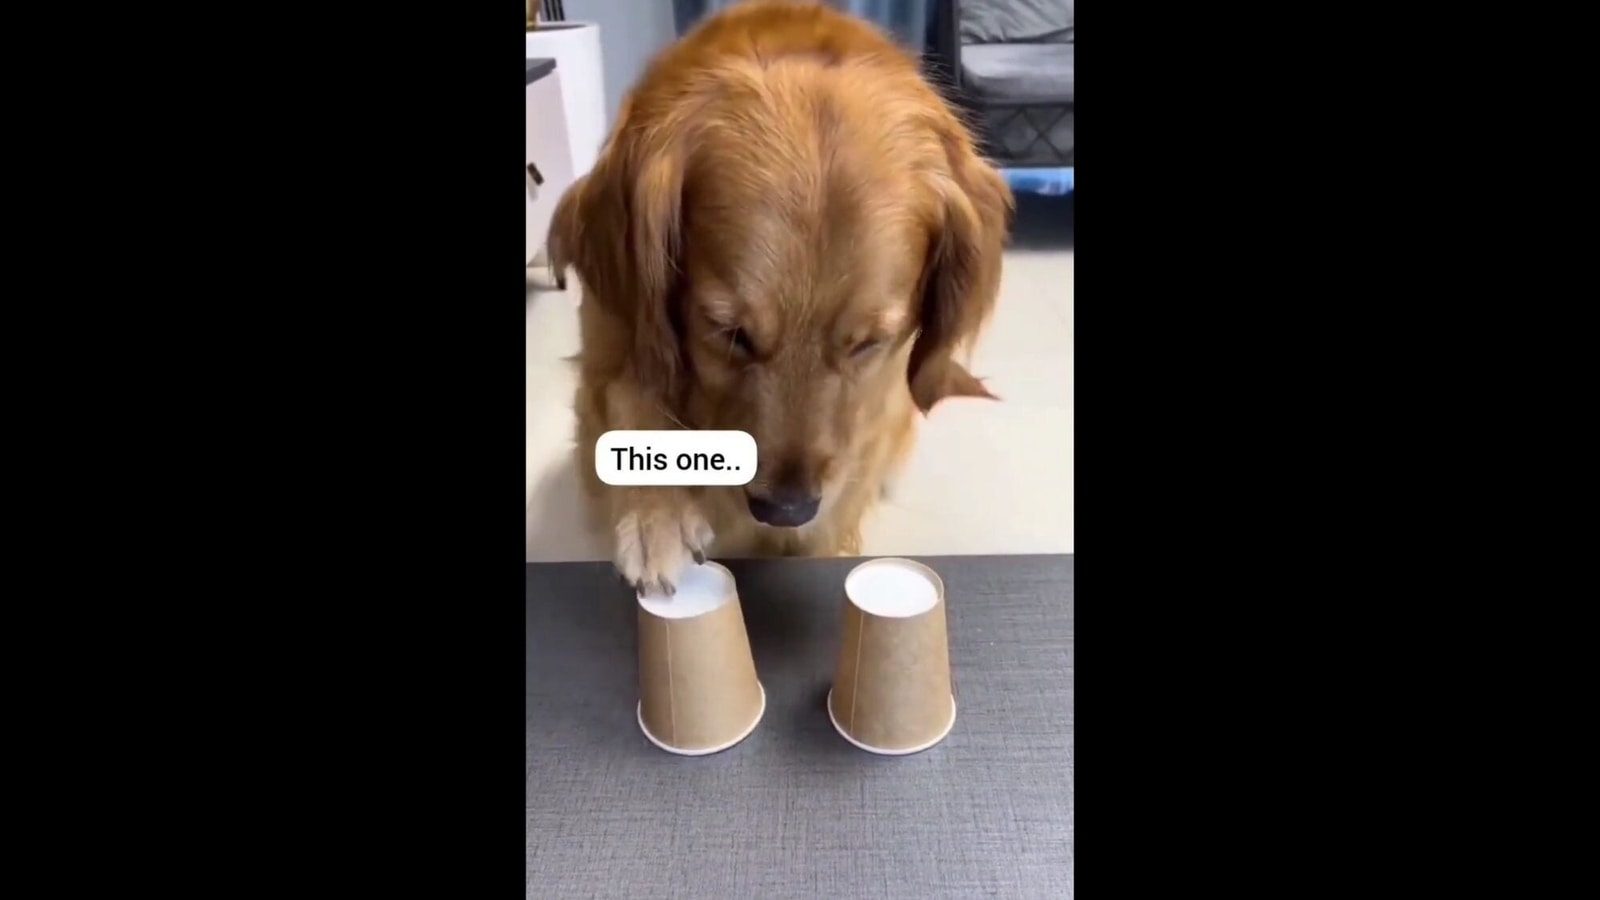 https://images.hindustantimes.com/img/2022/09/05/1600x900/golden-retriever-dog-plays-cup-game_1662388124470_1662388136457_1662388136457.jpg